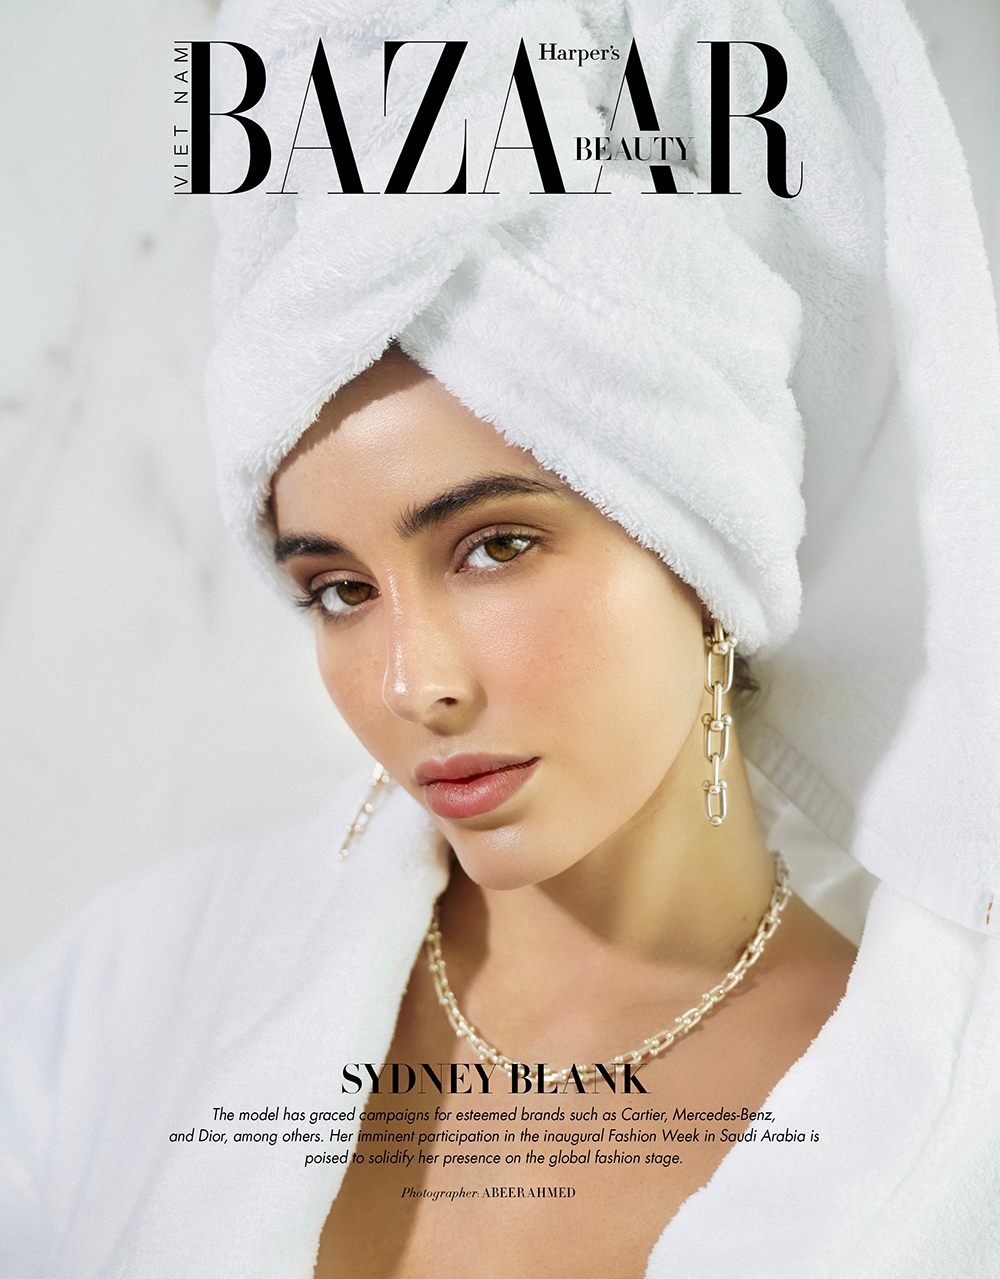 Sydney Blank, a luminary in the world of beauty and fashion 1